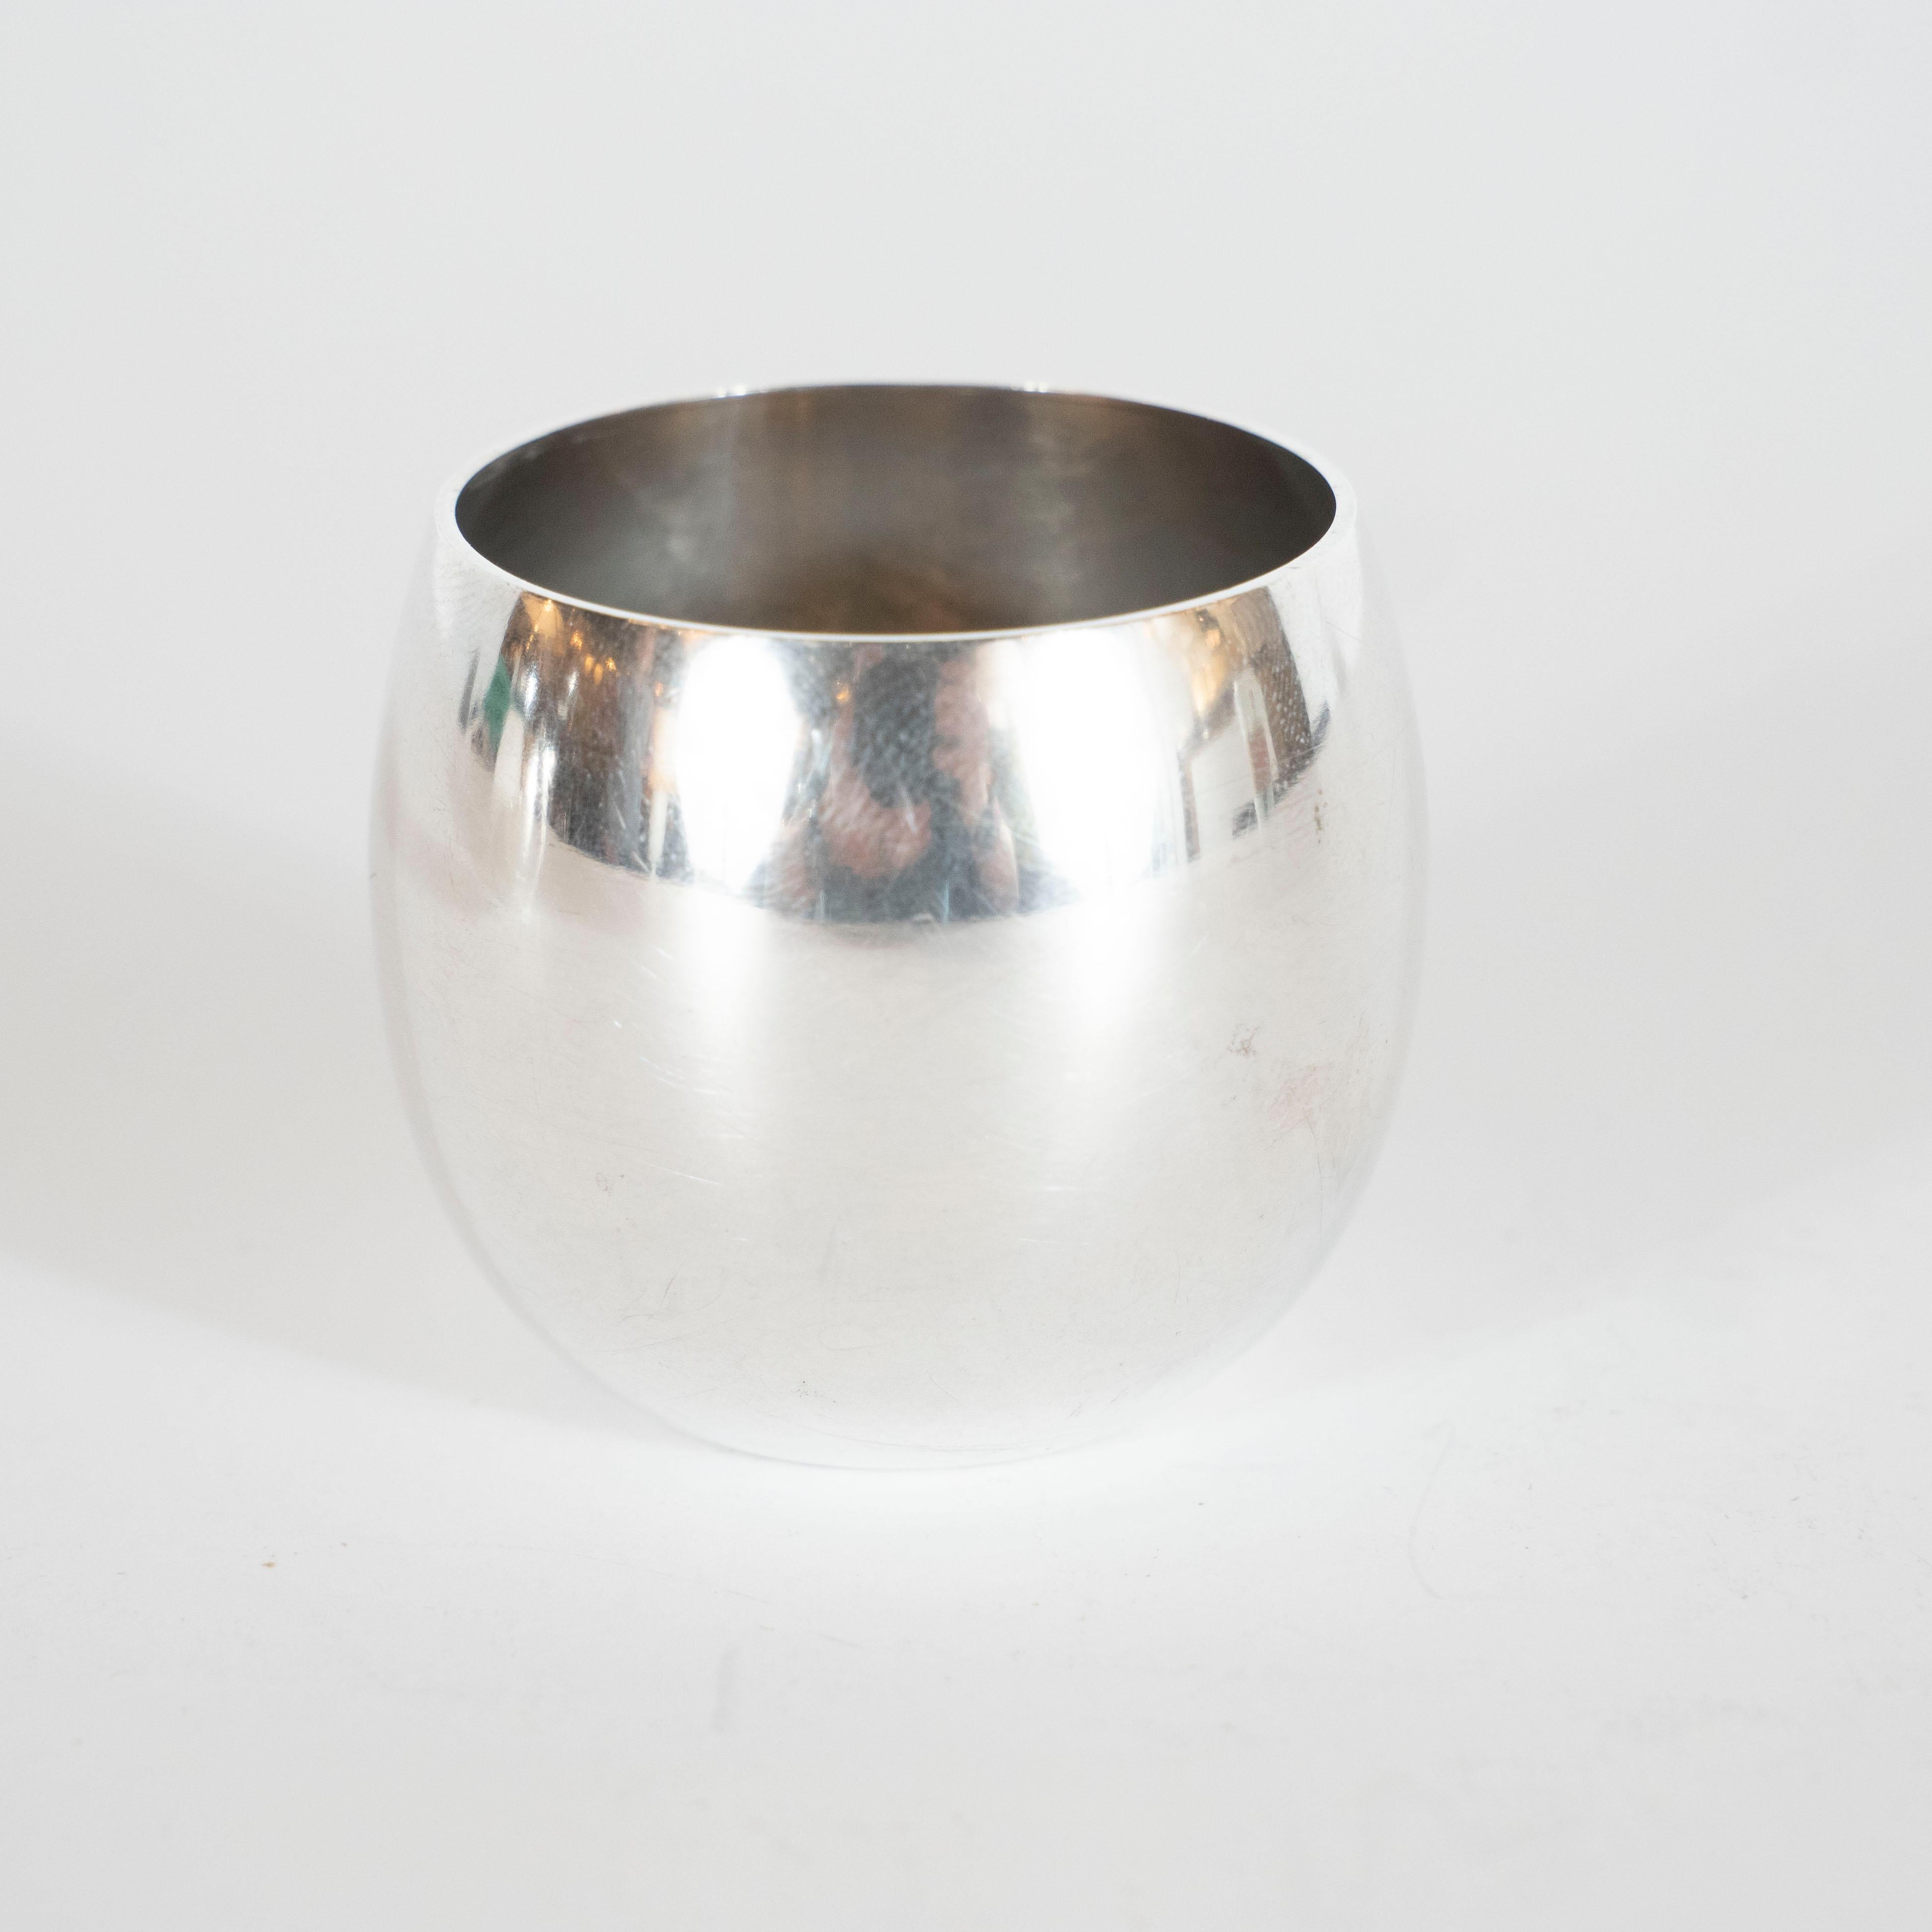 This elegant and understated set of salt and pepper cellars were realized by Tiffany & Co.- one of America's most esteemed producers of fine sterling silver objects and jewelry since 1837. Each offers a gently curved cylindrical body with an open